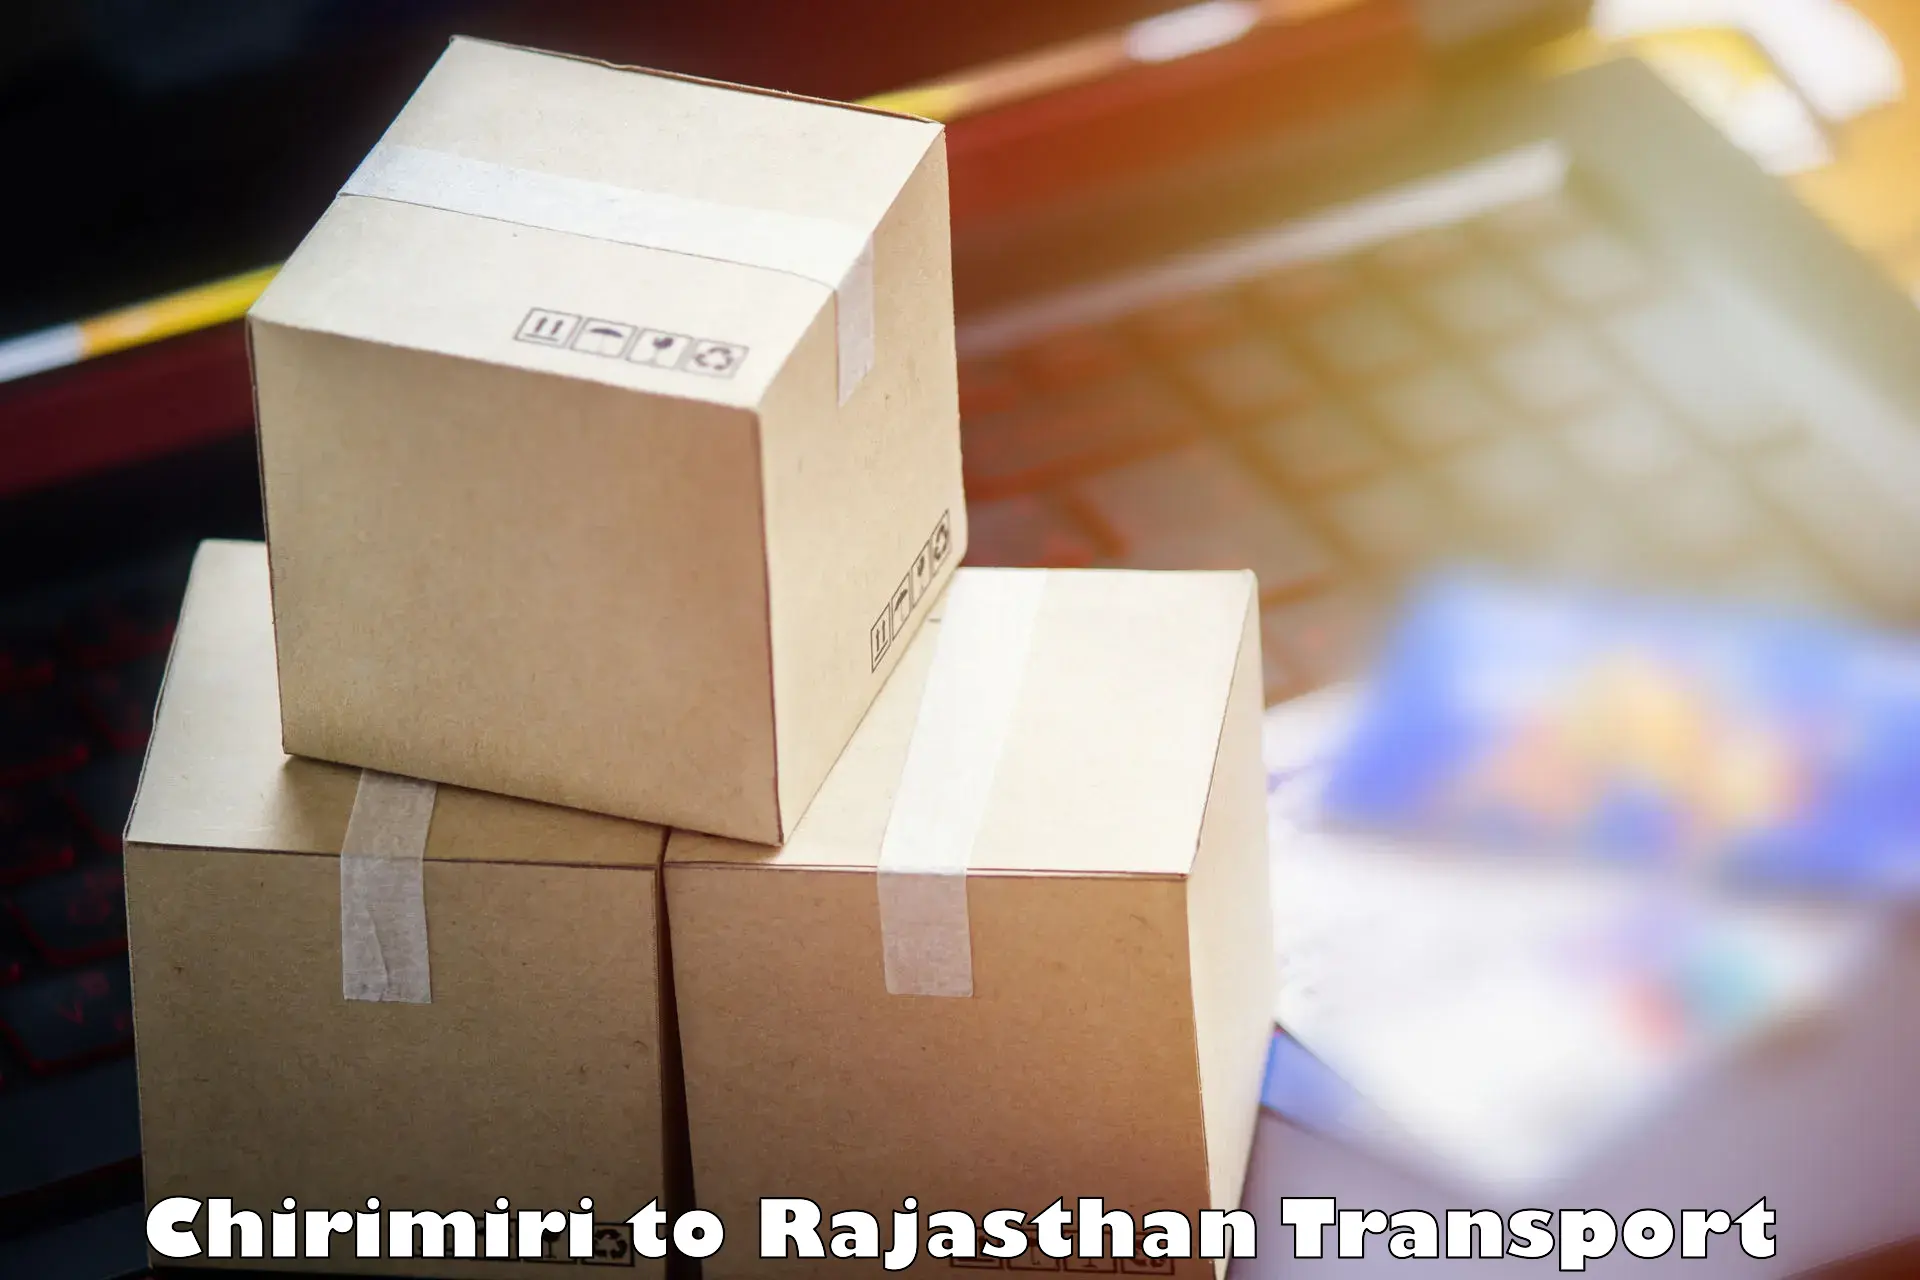 Domestic goods transportation services Chirimiri to Rajasthan